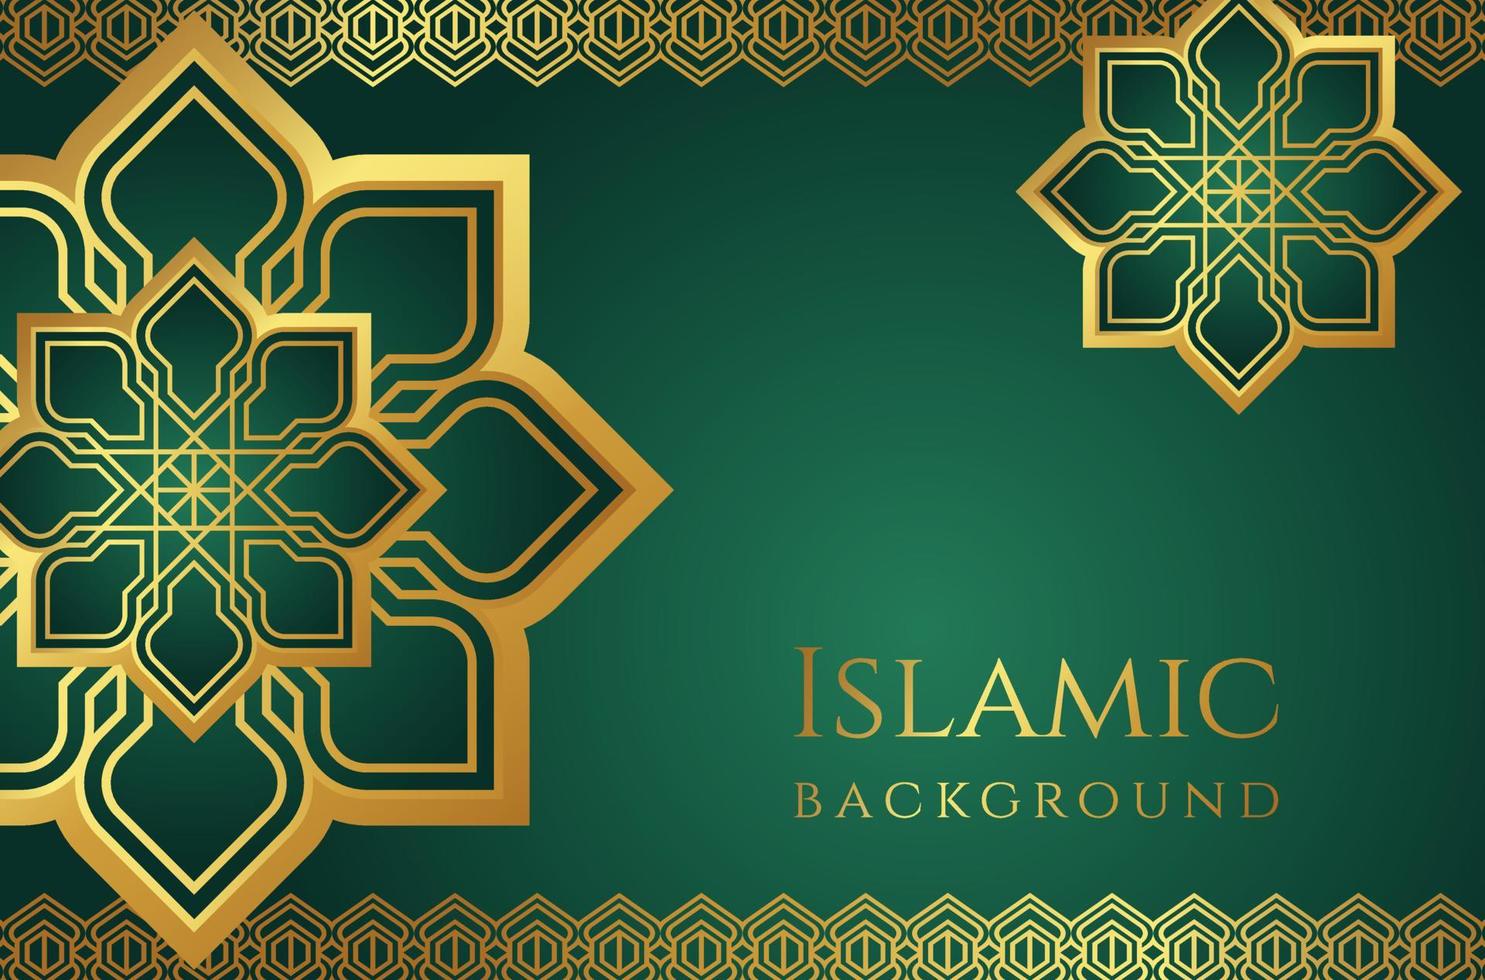 Islamic background with decorative ornament pattern. - Vector ...